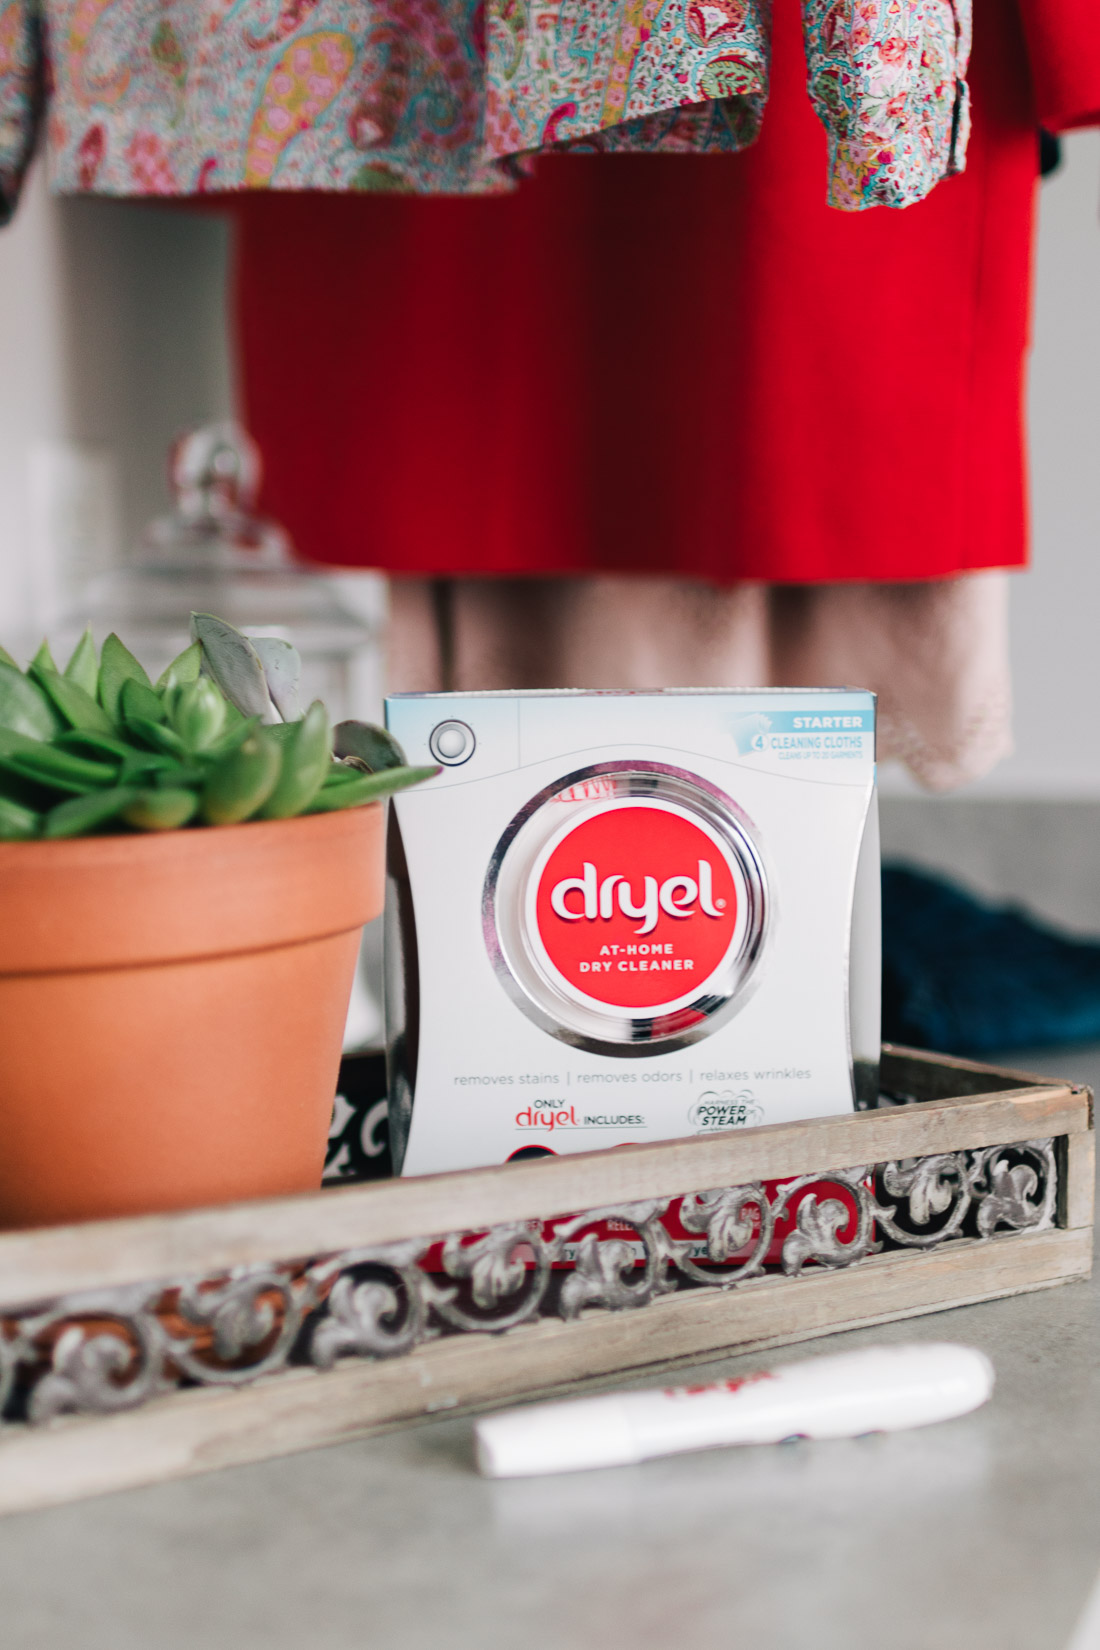 Everything you need to know about Home Dry Cleaning Kits